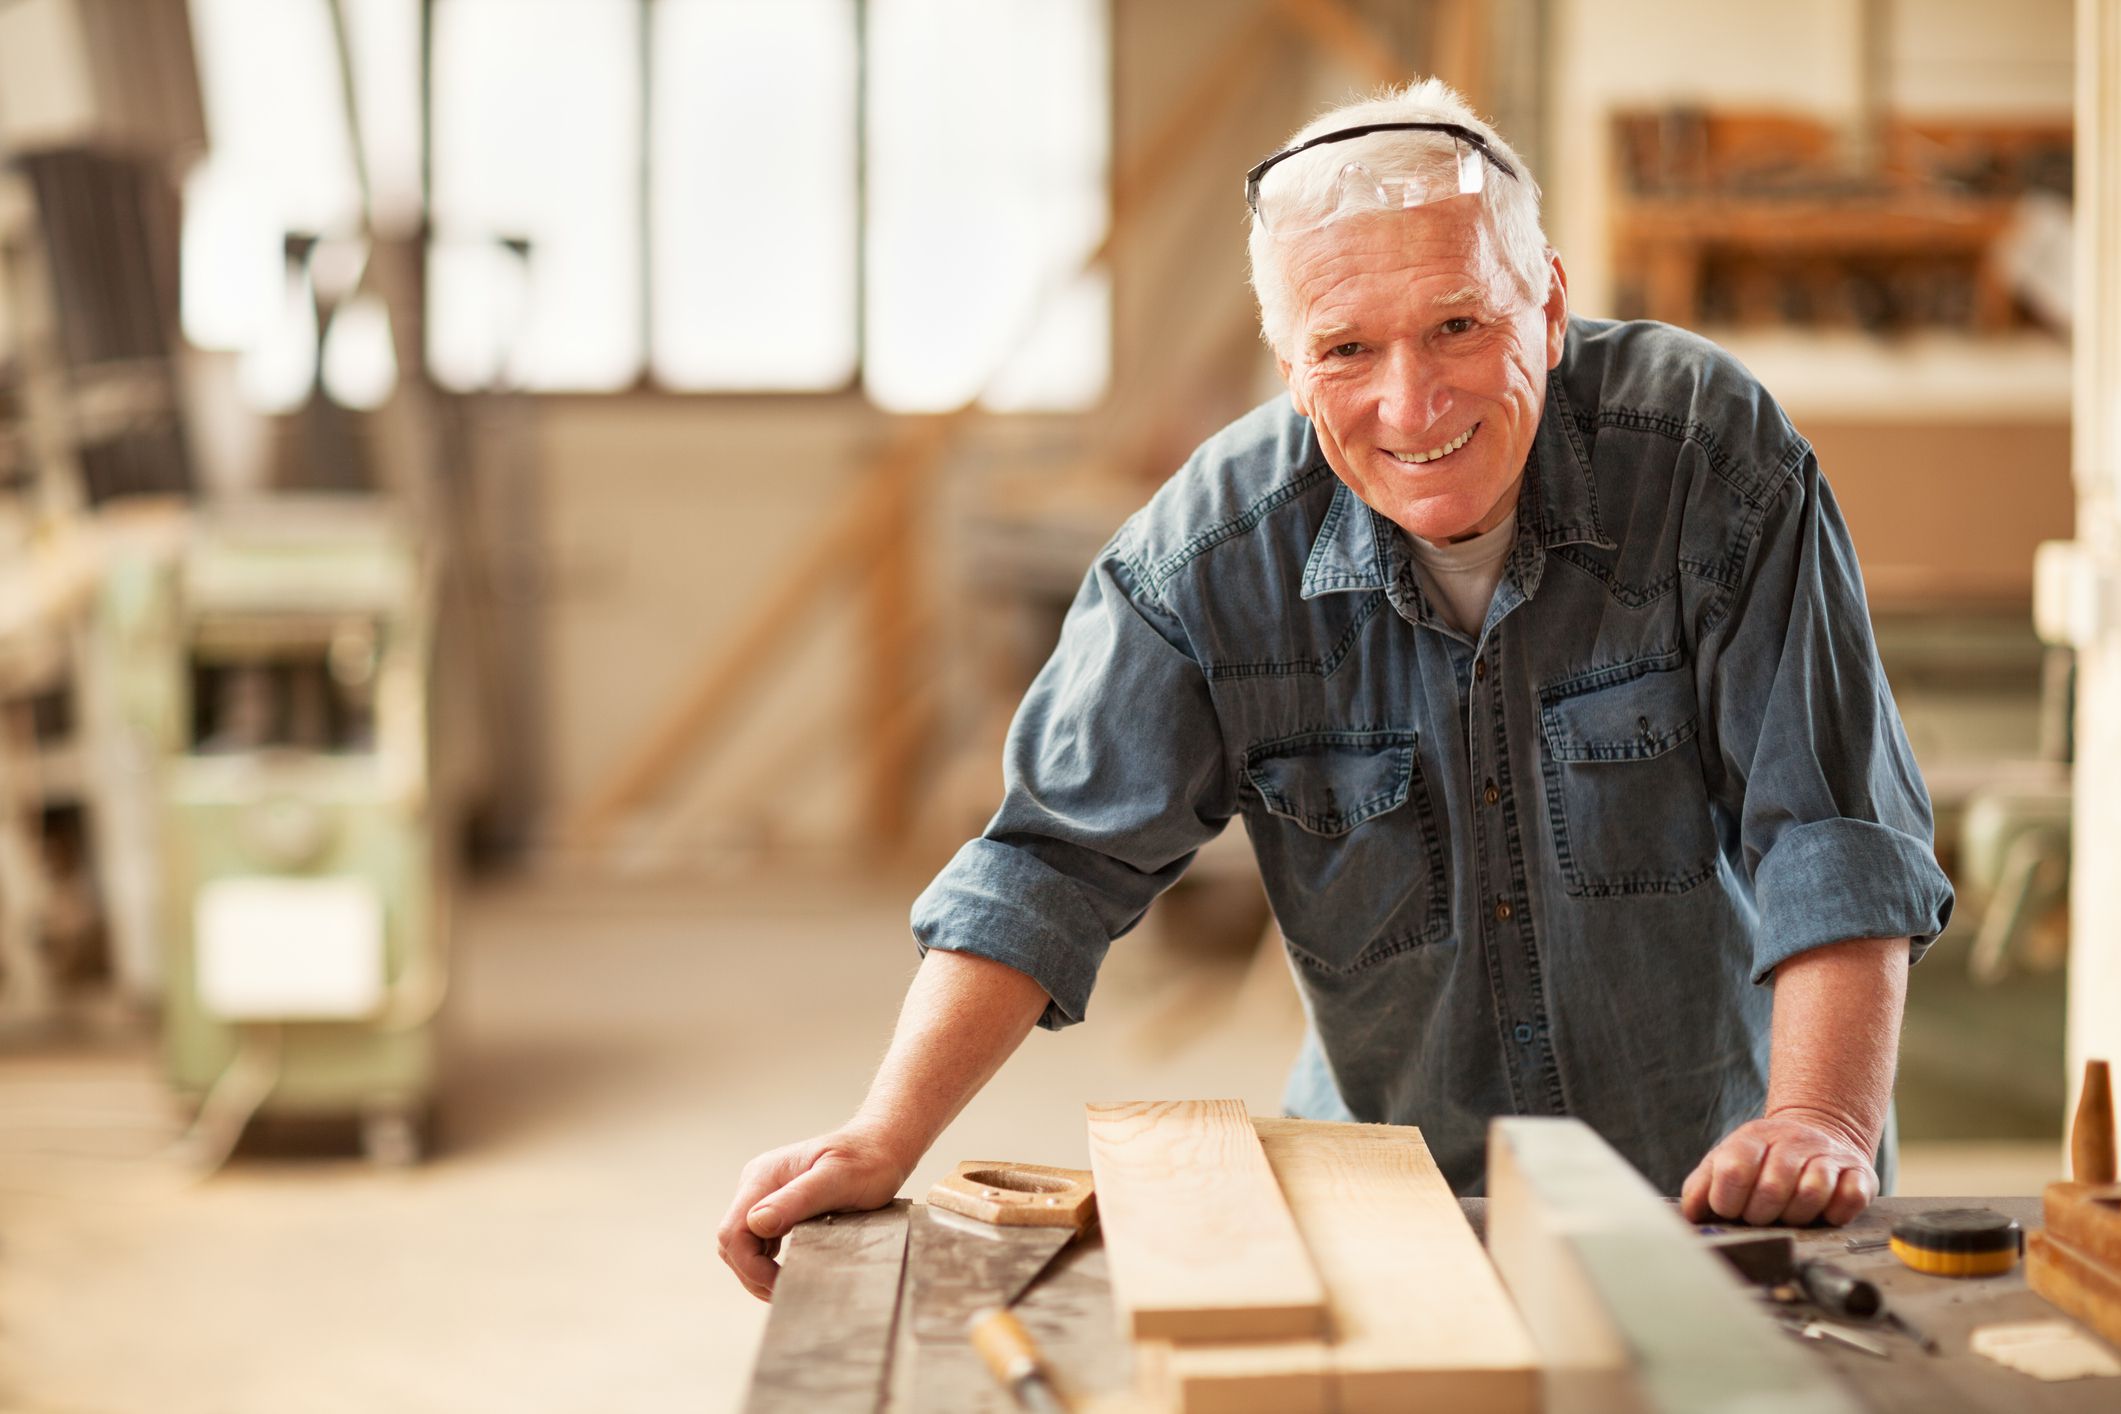 <p>Once workers reach 65, they are likely shifting to part-time work to stay active during retirement and to earn a little extra retirement income. Some people need more <a href="https://www.sofi.com/learn/content/what-is-a-good-monthly-retirement-income-for-a-couple/">retirement income</a> than others, and Social Security benefits and savings aren’t always enough. Which may be why we see salaries drop to an average of $54,444 per year for those 65 or older.</p>